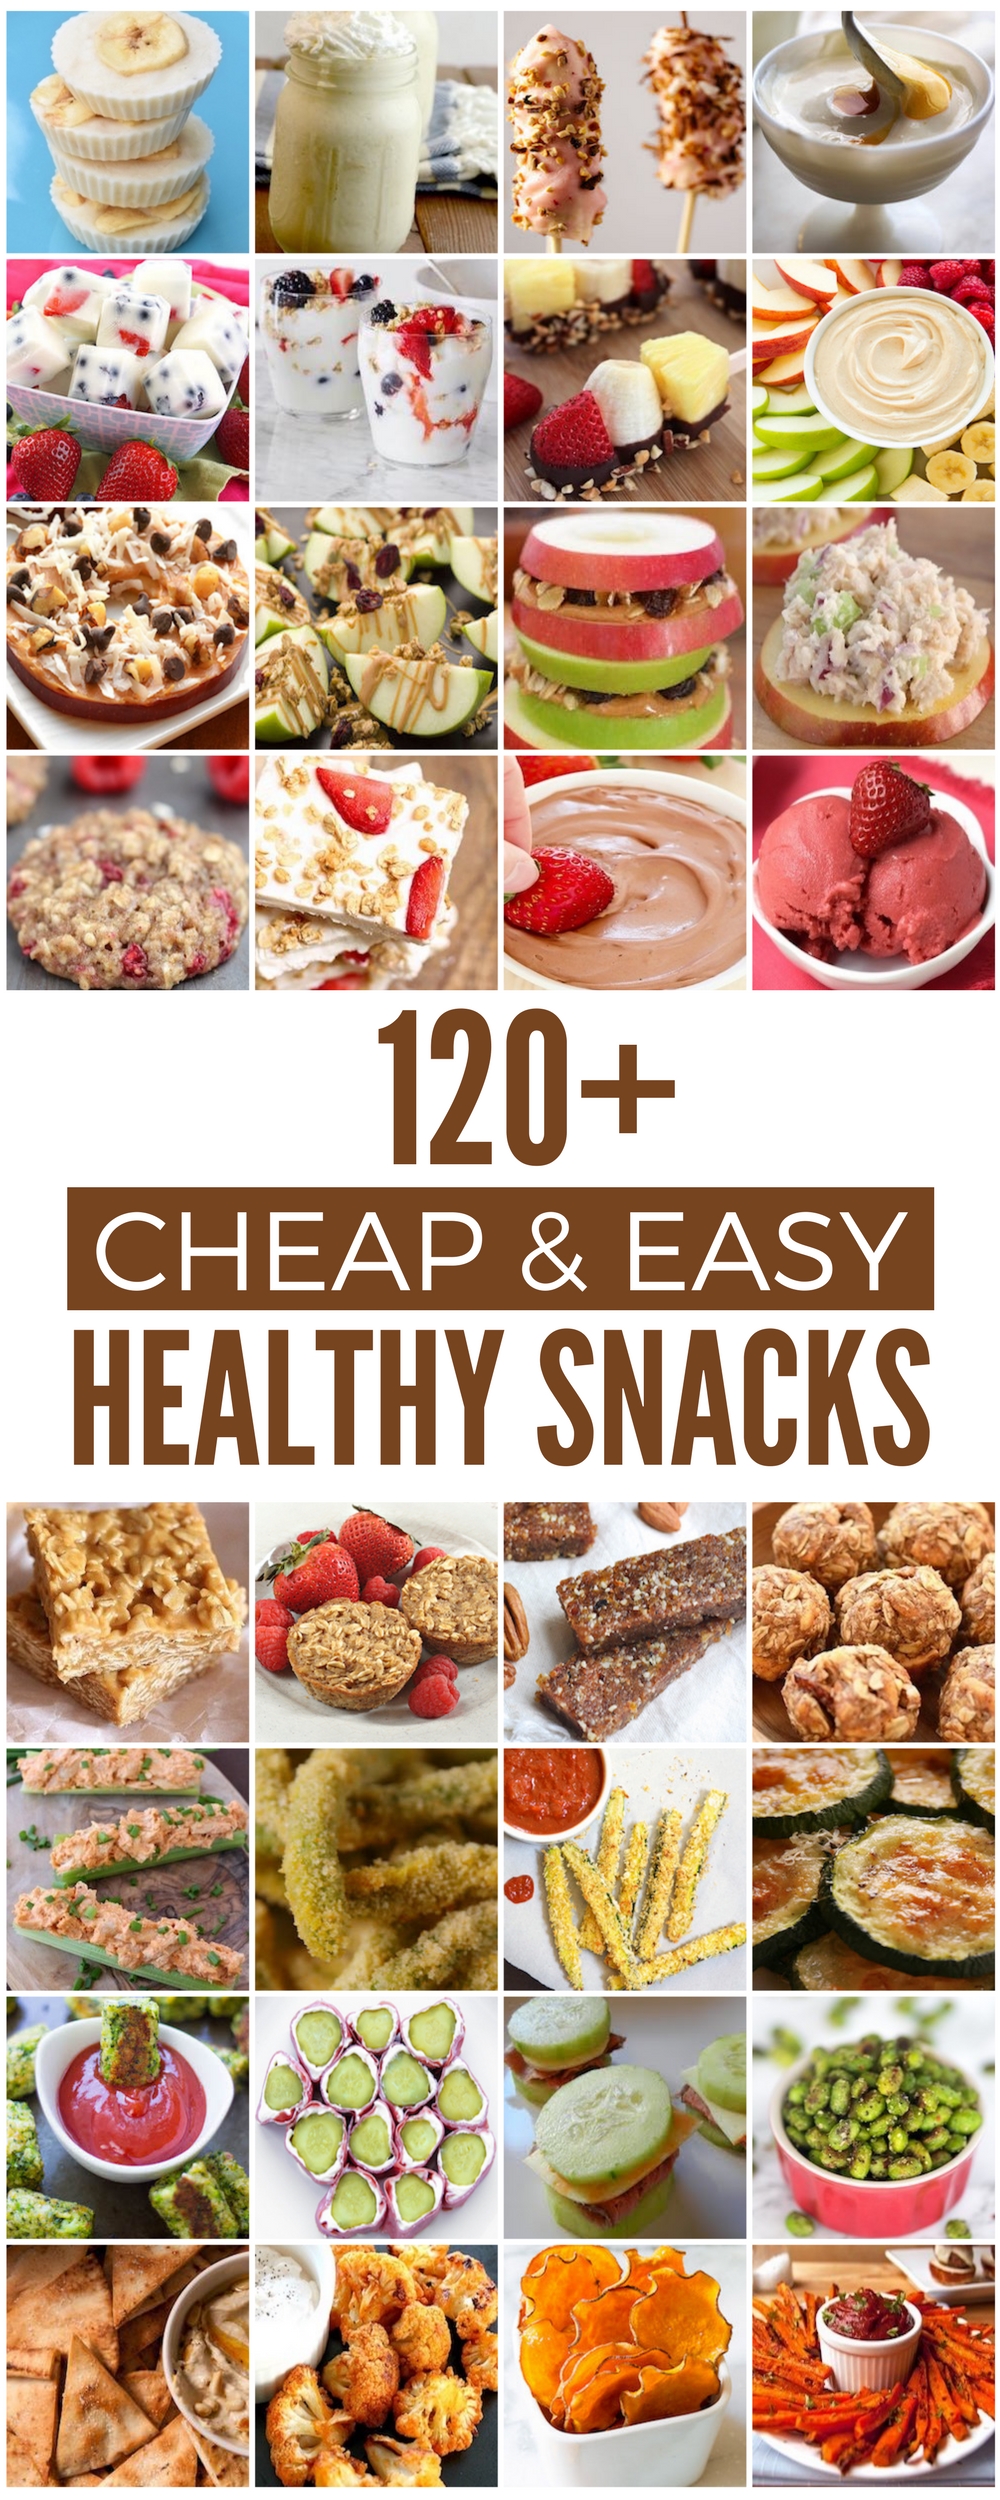 10 Nice Healthy Snack Ideas For Adults 120 cheap healthy snacks prudent penny pincher 2022